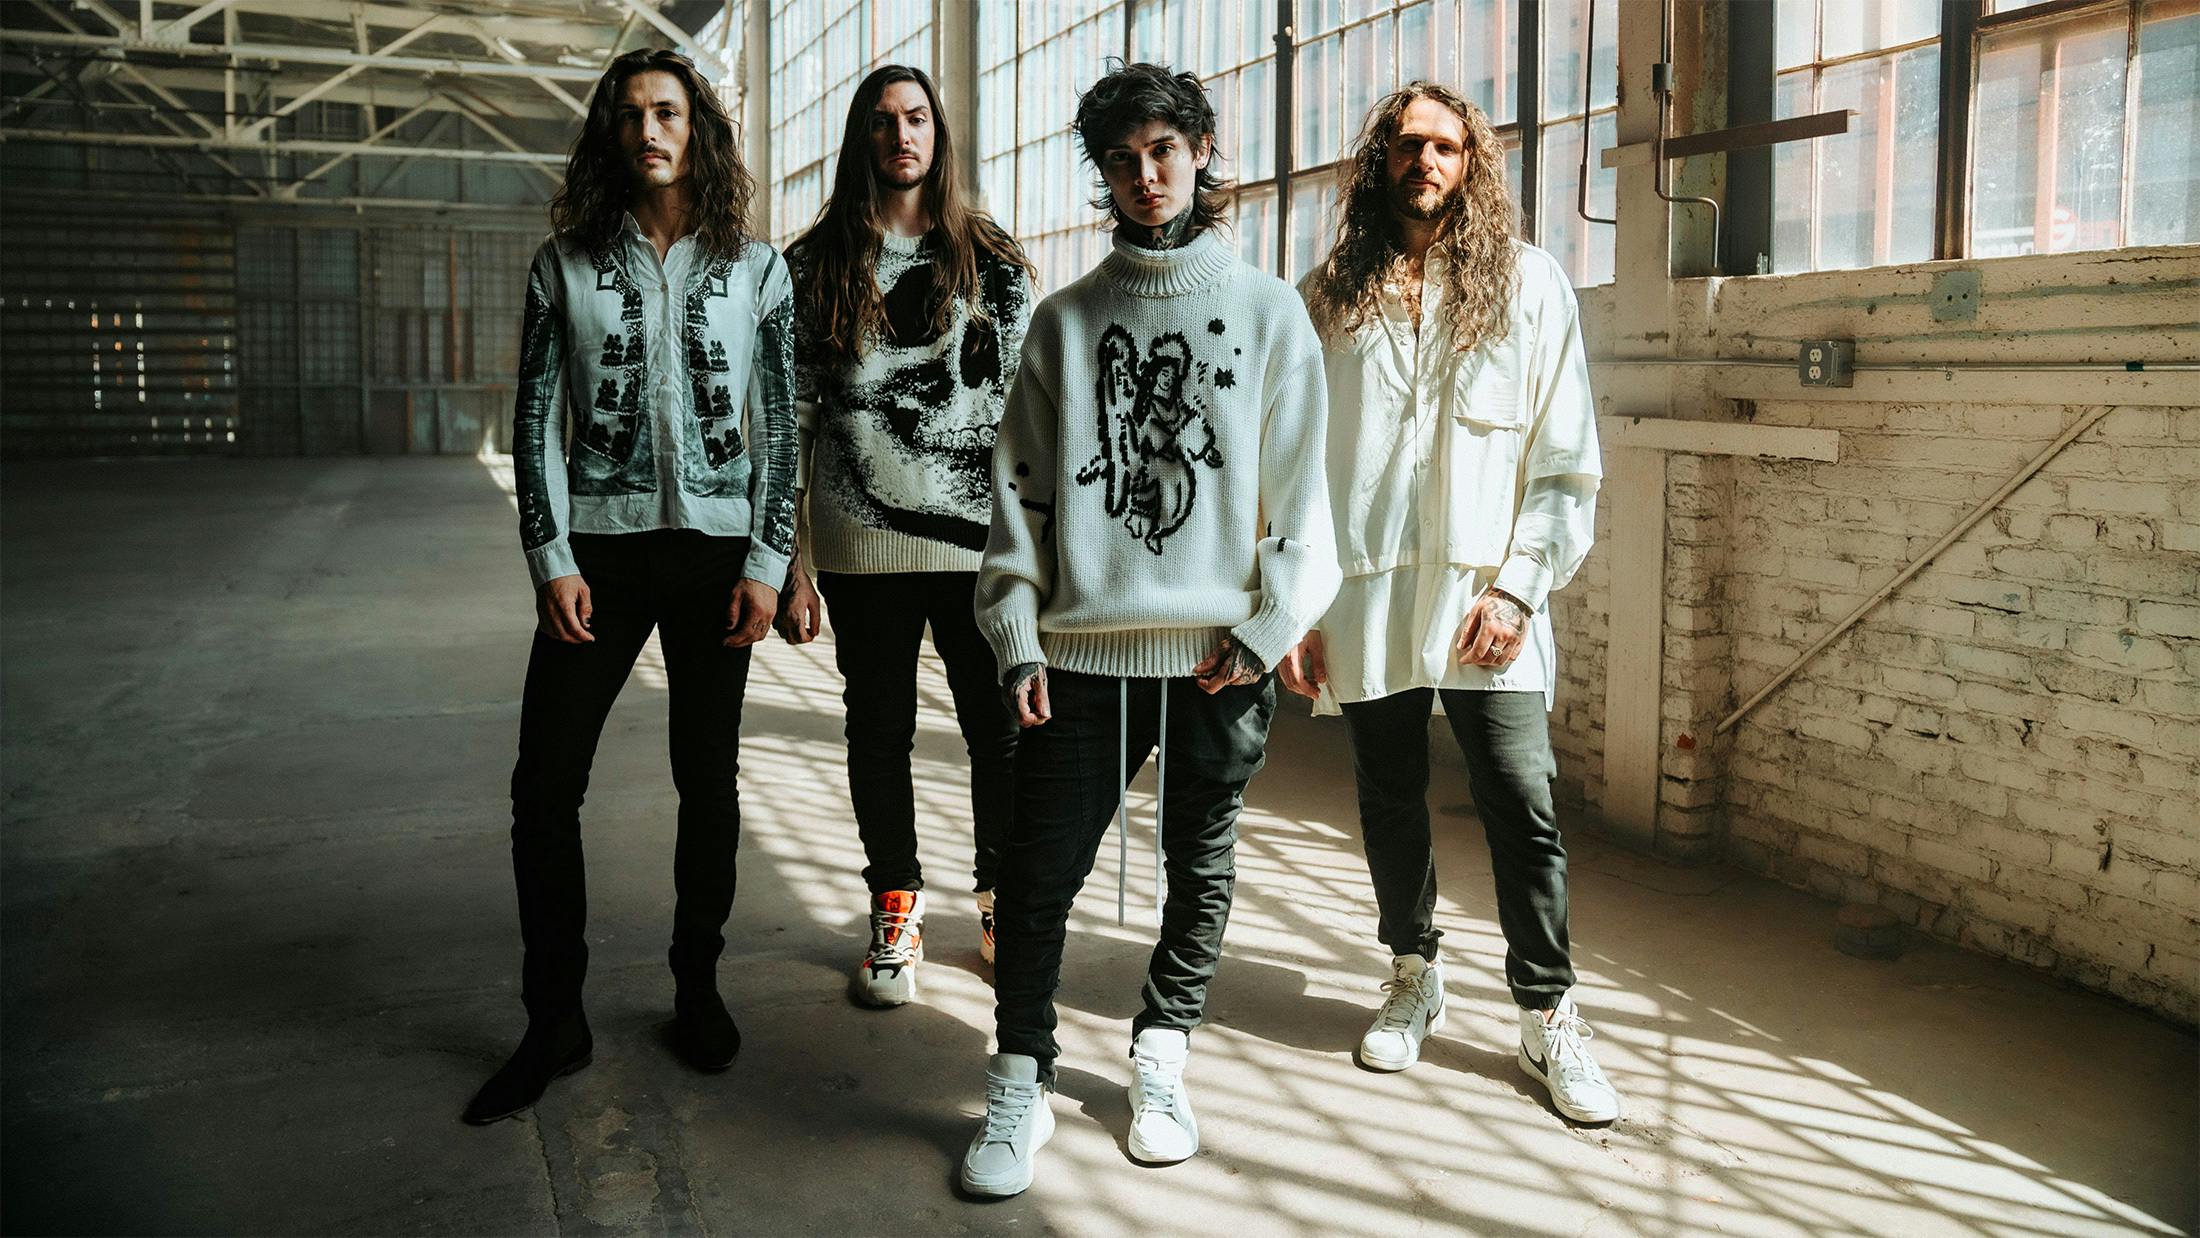 Polyphia release new track Ego Death featuring Steve Vai